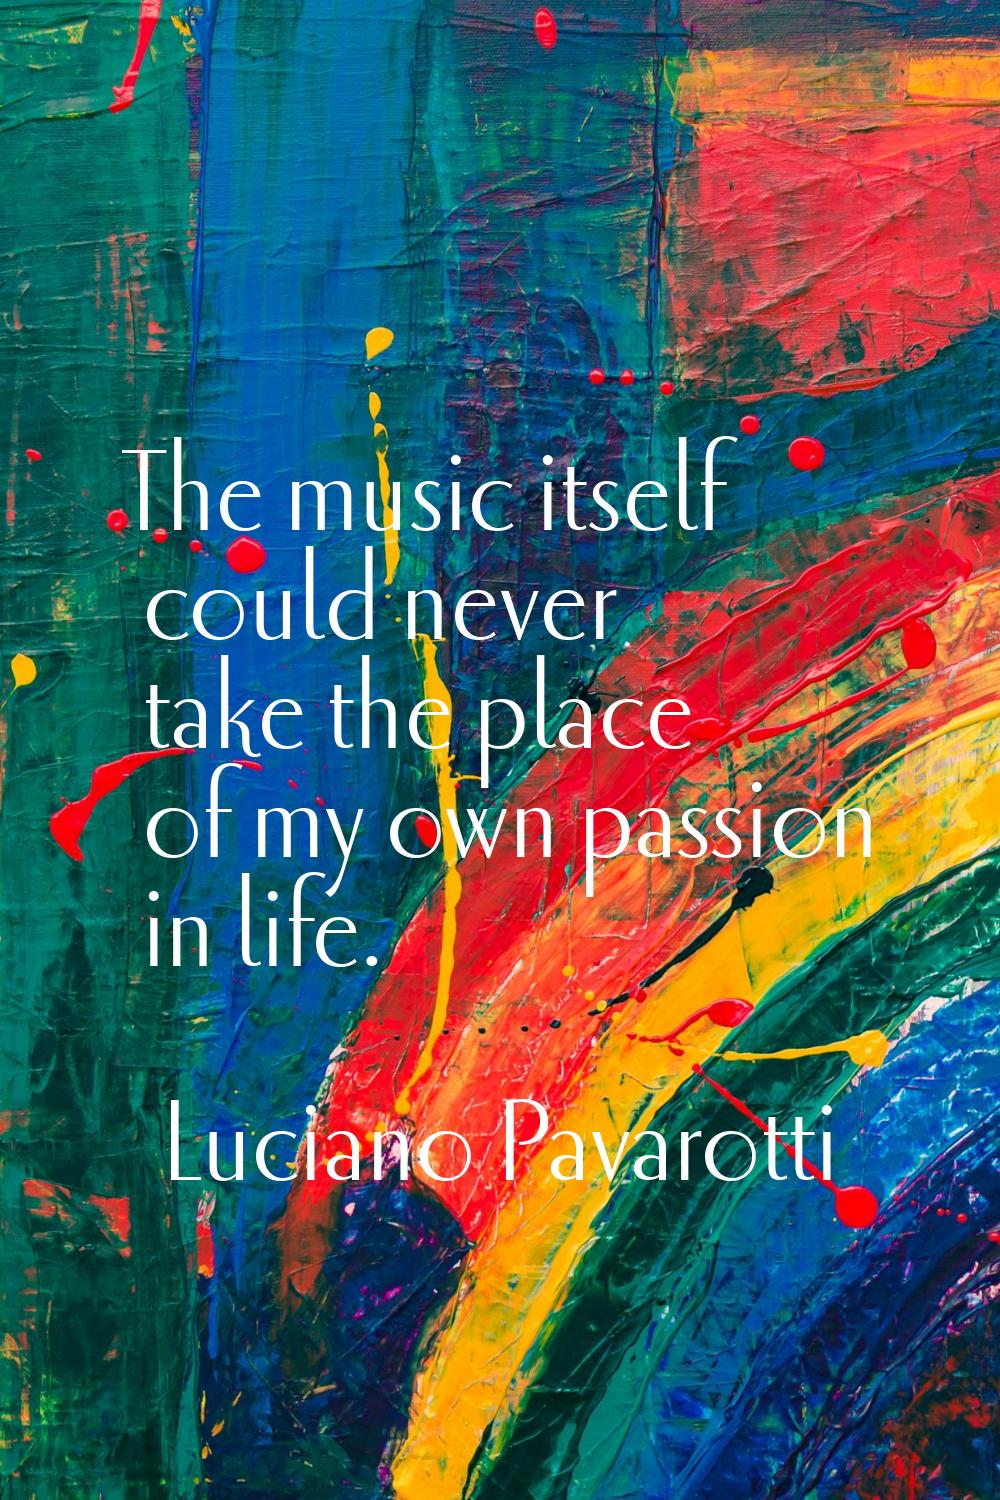 The music itself could never take the place of my own passion in life.